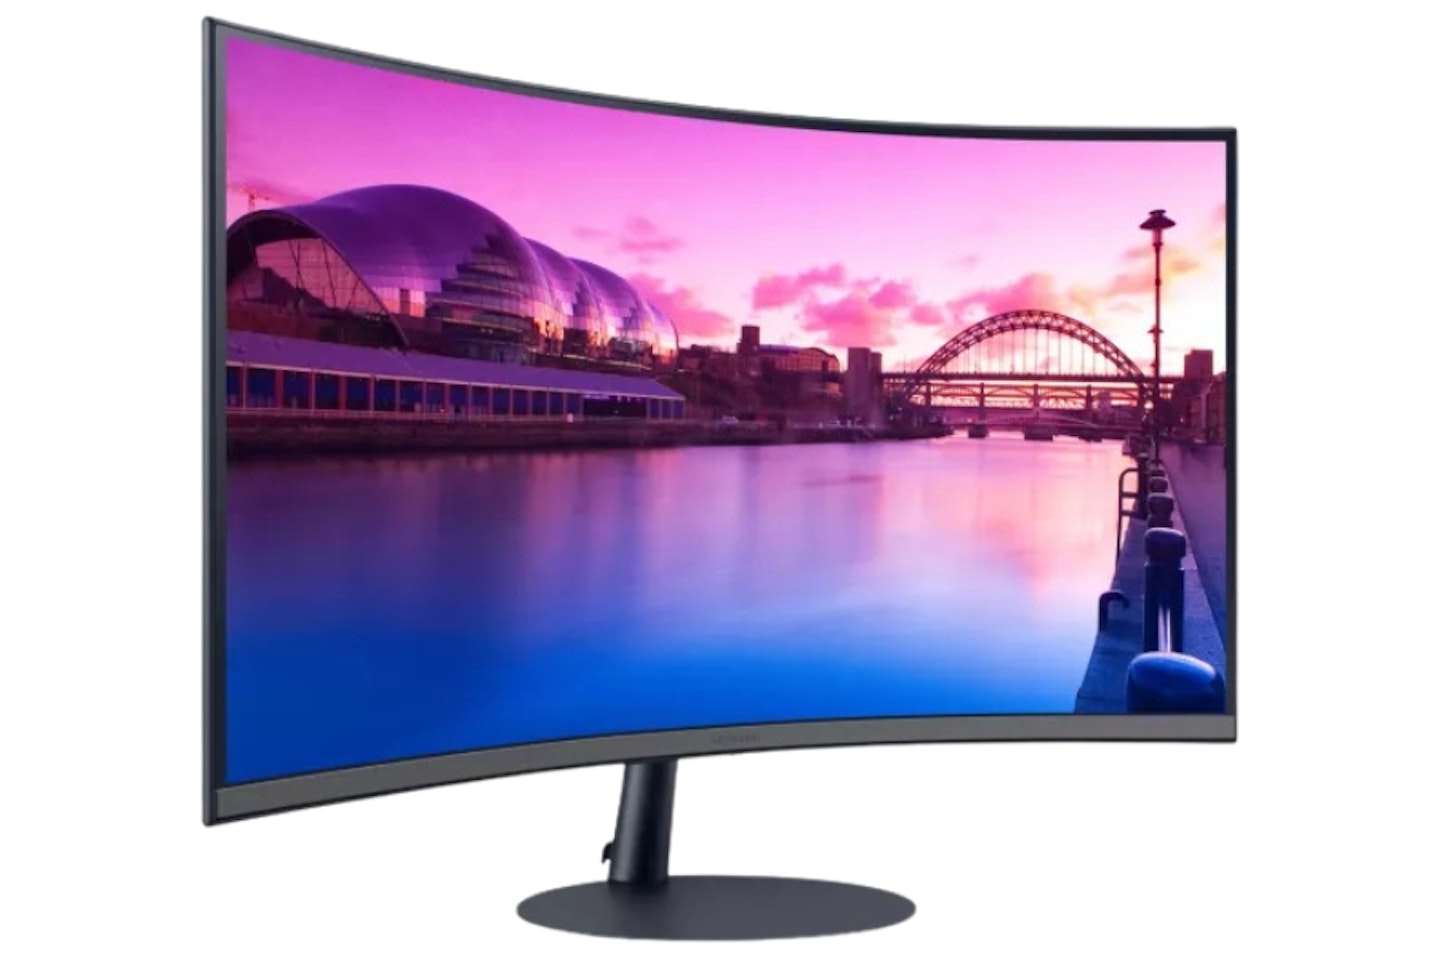 Samsung LS27C390 Curved Monitor